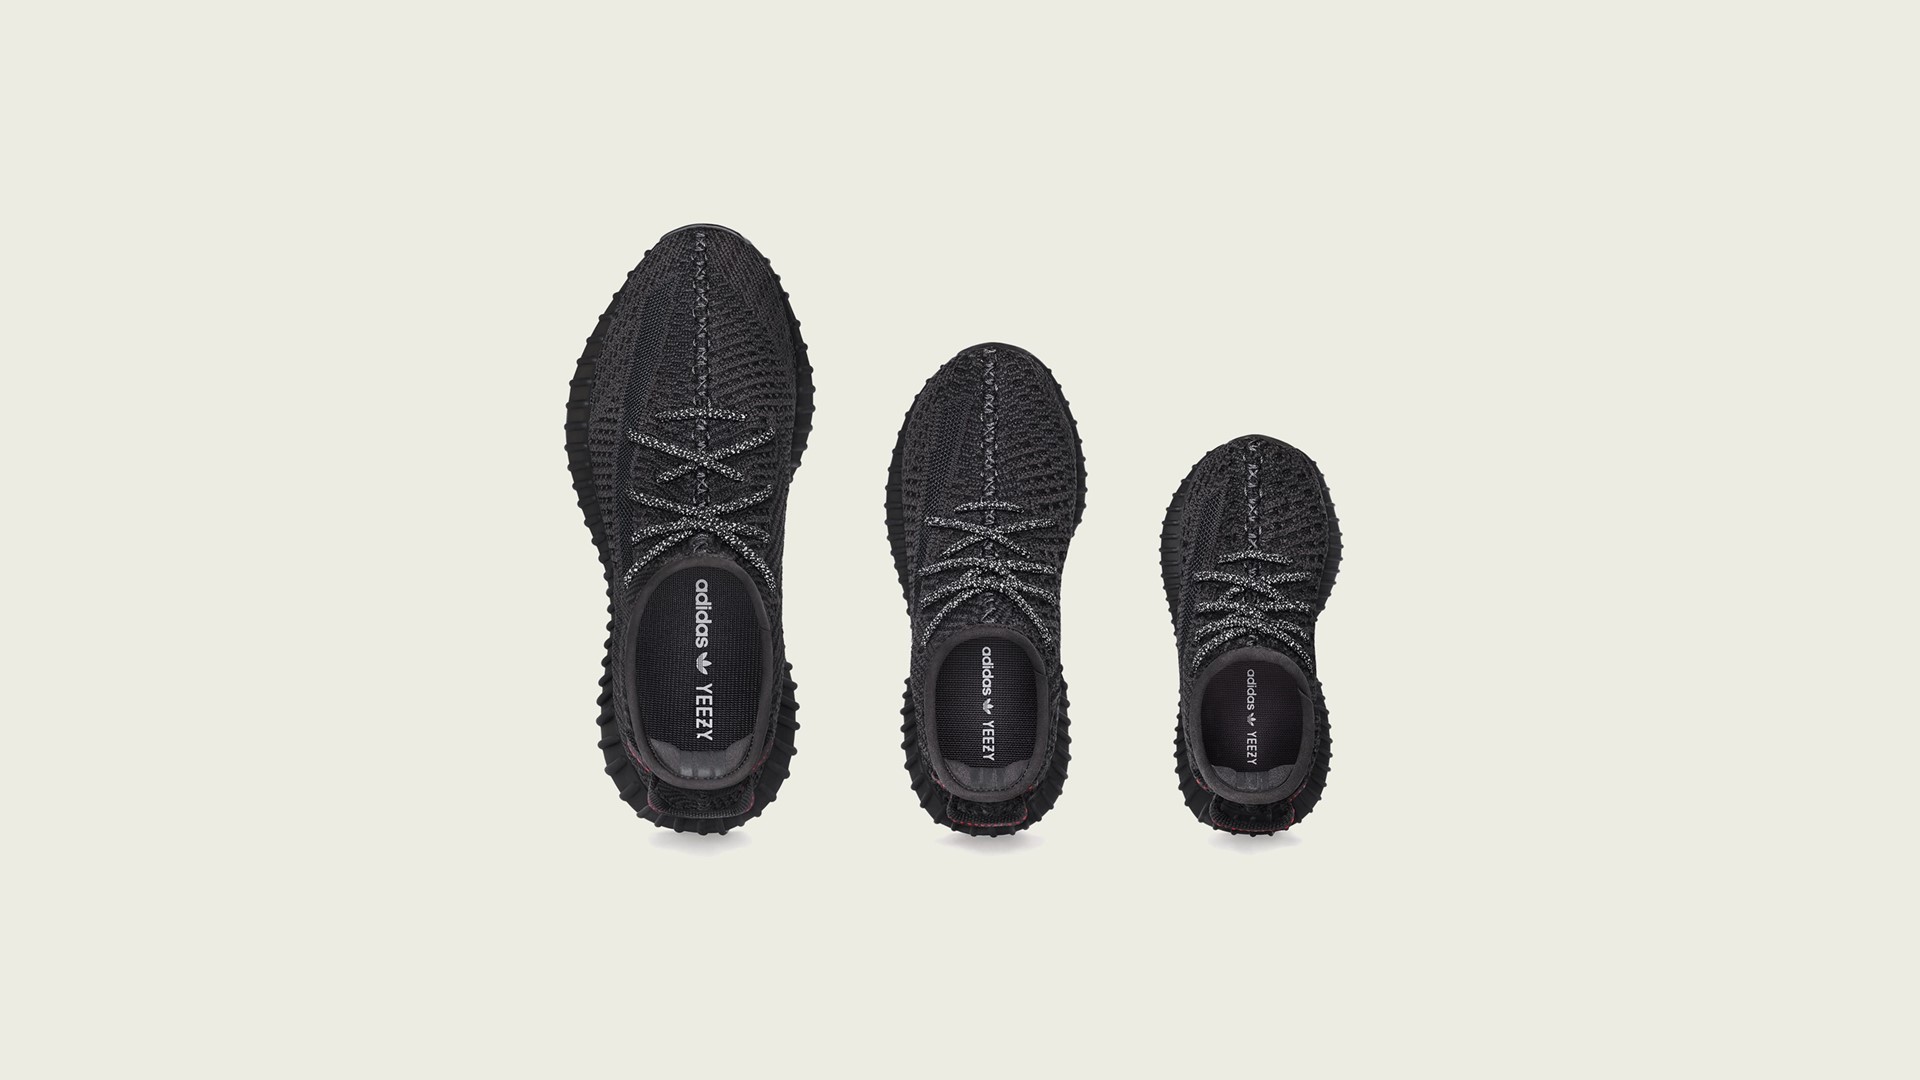 adidas + KANYE WEST announce the YEEZY BOOST 350 V2 Black